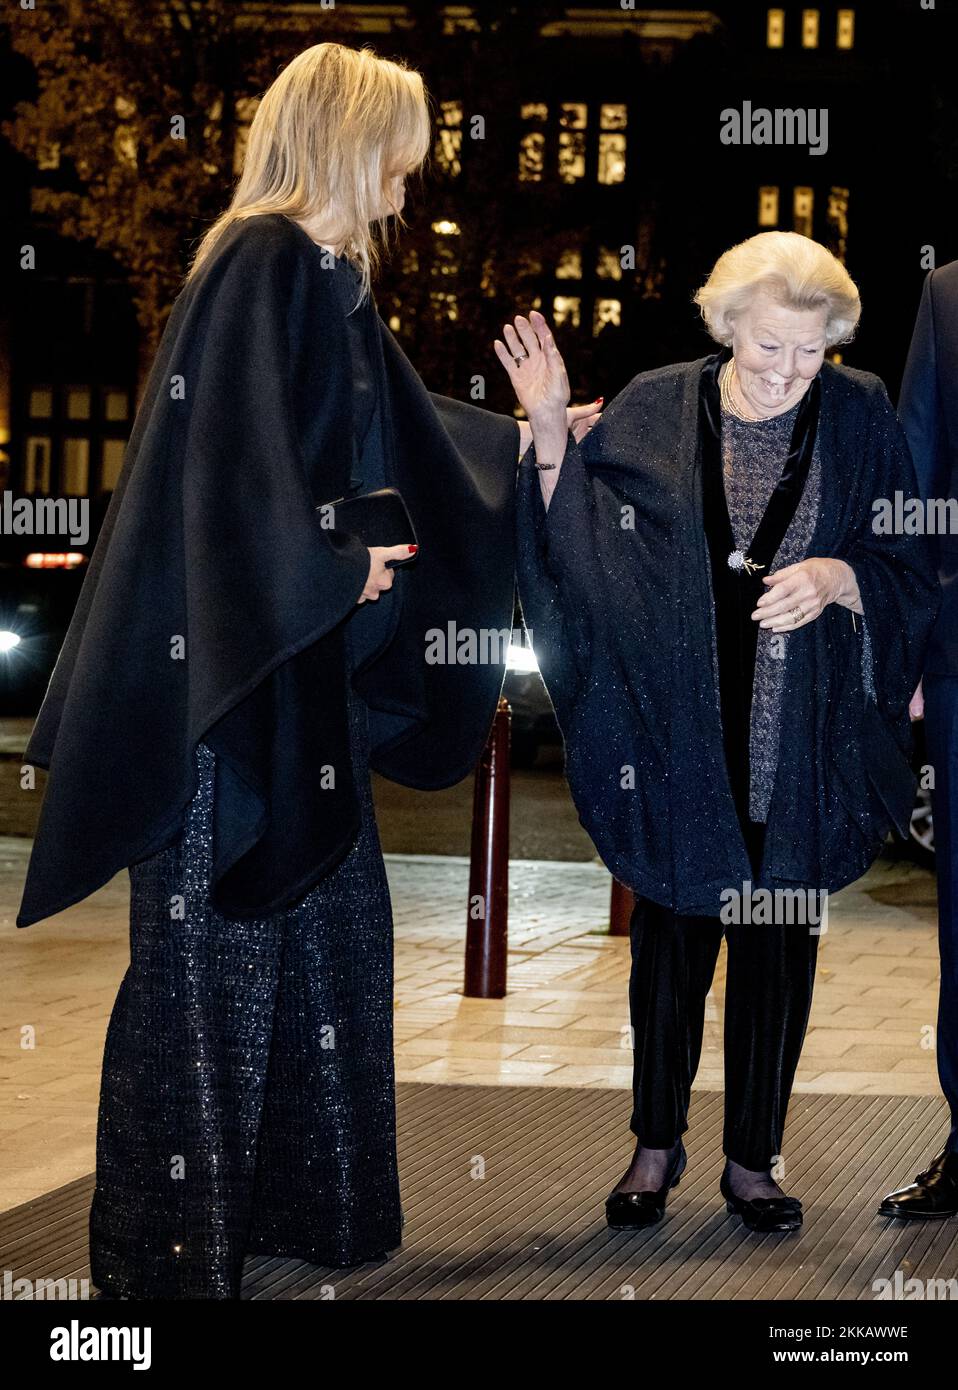 AMSTERDAM - Queen Maxima and Princess Beatrix arrive at the Concertgebouw. They visit a concert by the Royal Concertgebouw Orchestra, conducted by the 26-year-old future chief conductor Klaus Makela. Queen Maxima is the patroness of the orchestra. ANP ROBIN UTRECHT netherlands out - belgium out Stock Photo